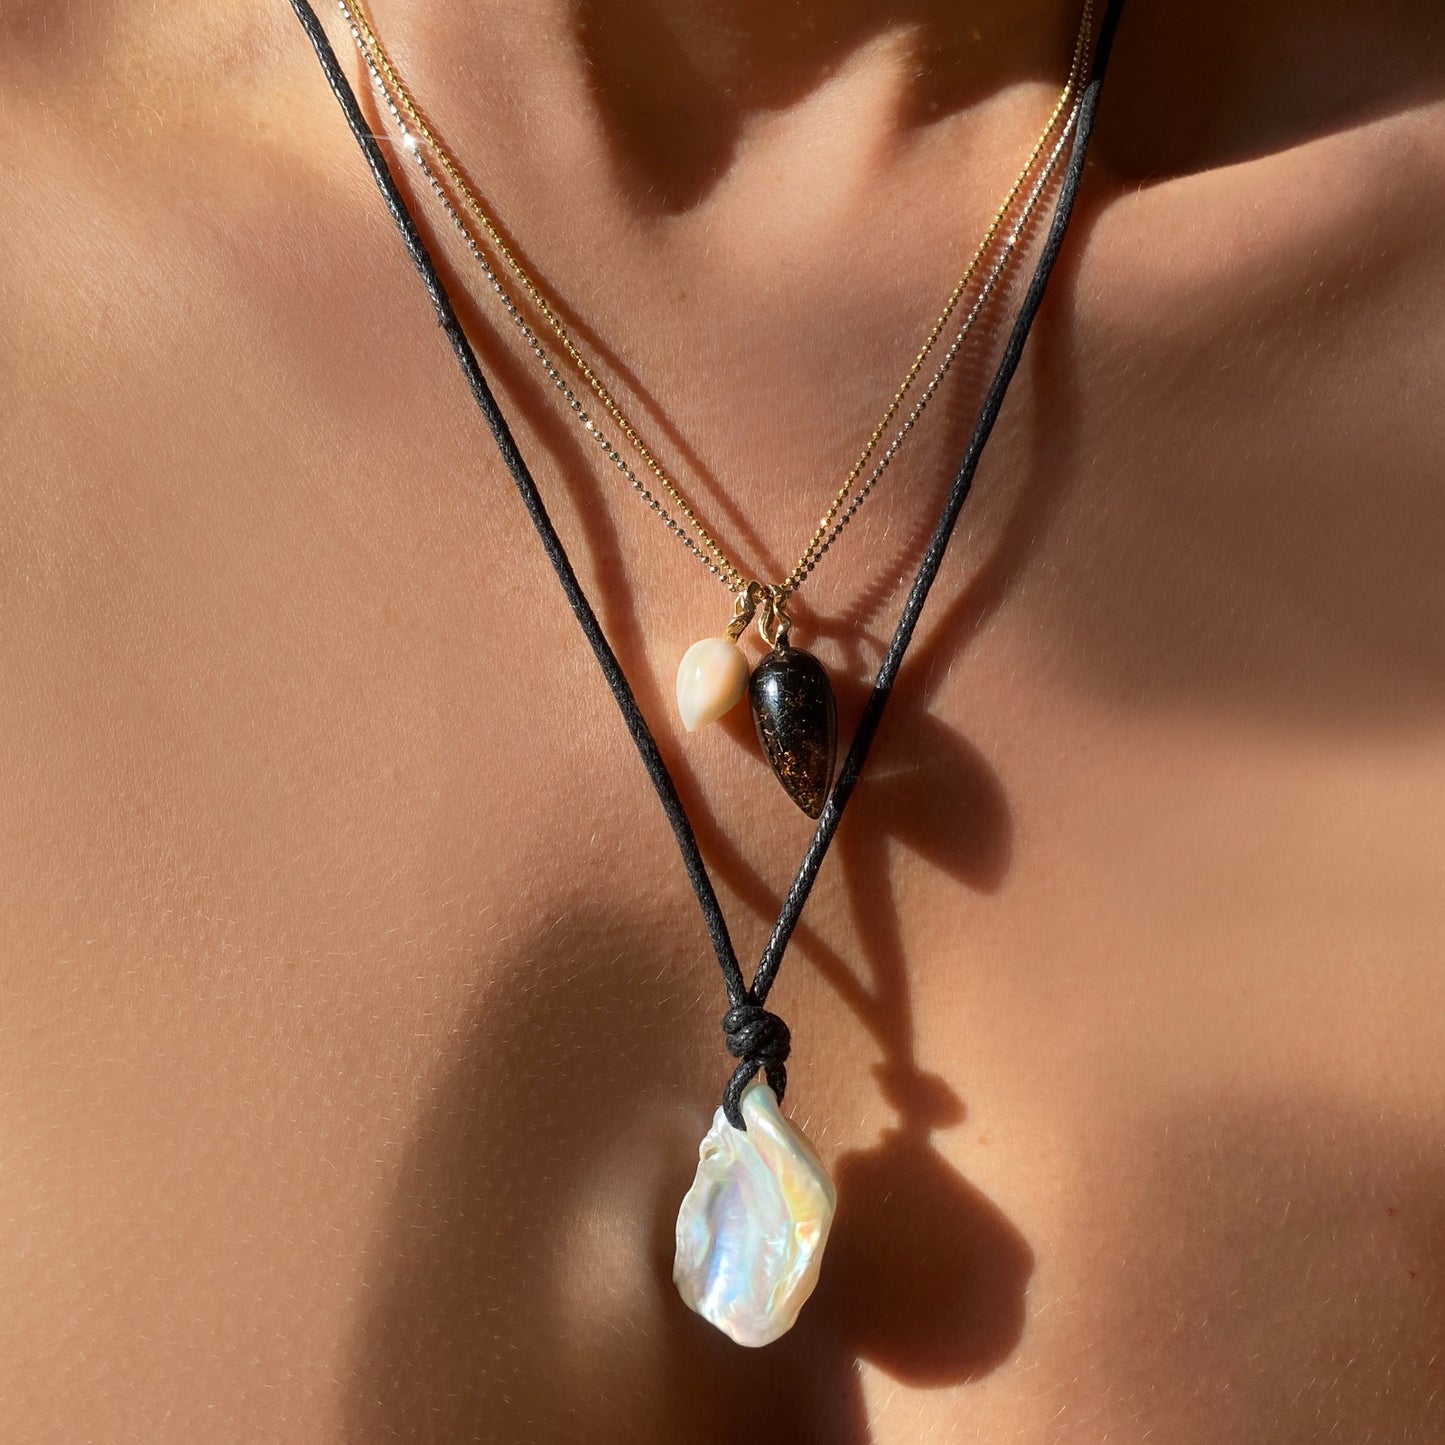 Keishi Pearl with Nylon Cord. Styled with two acorn charms hanging from a neck with two diamond cut bead chain necklaces.